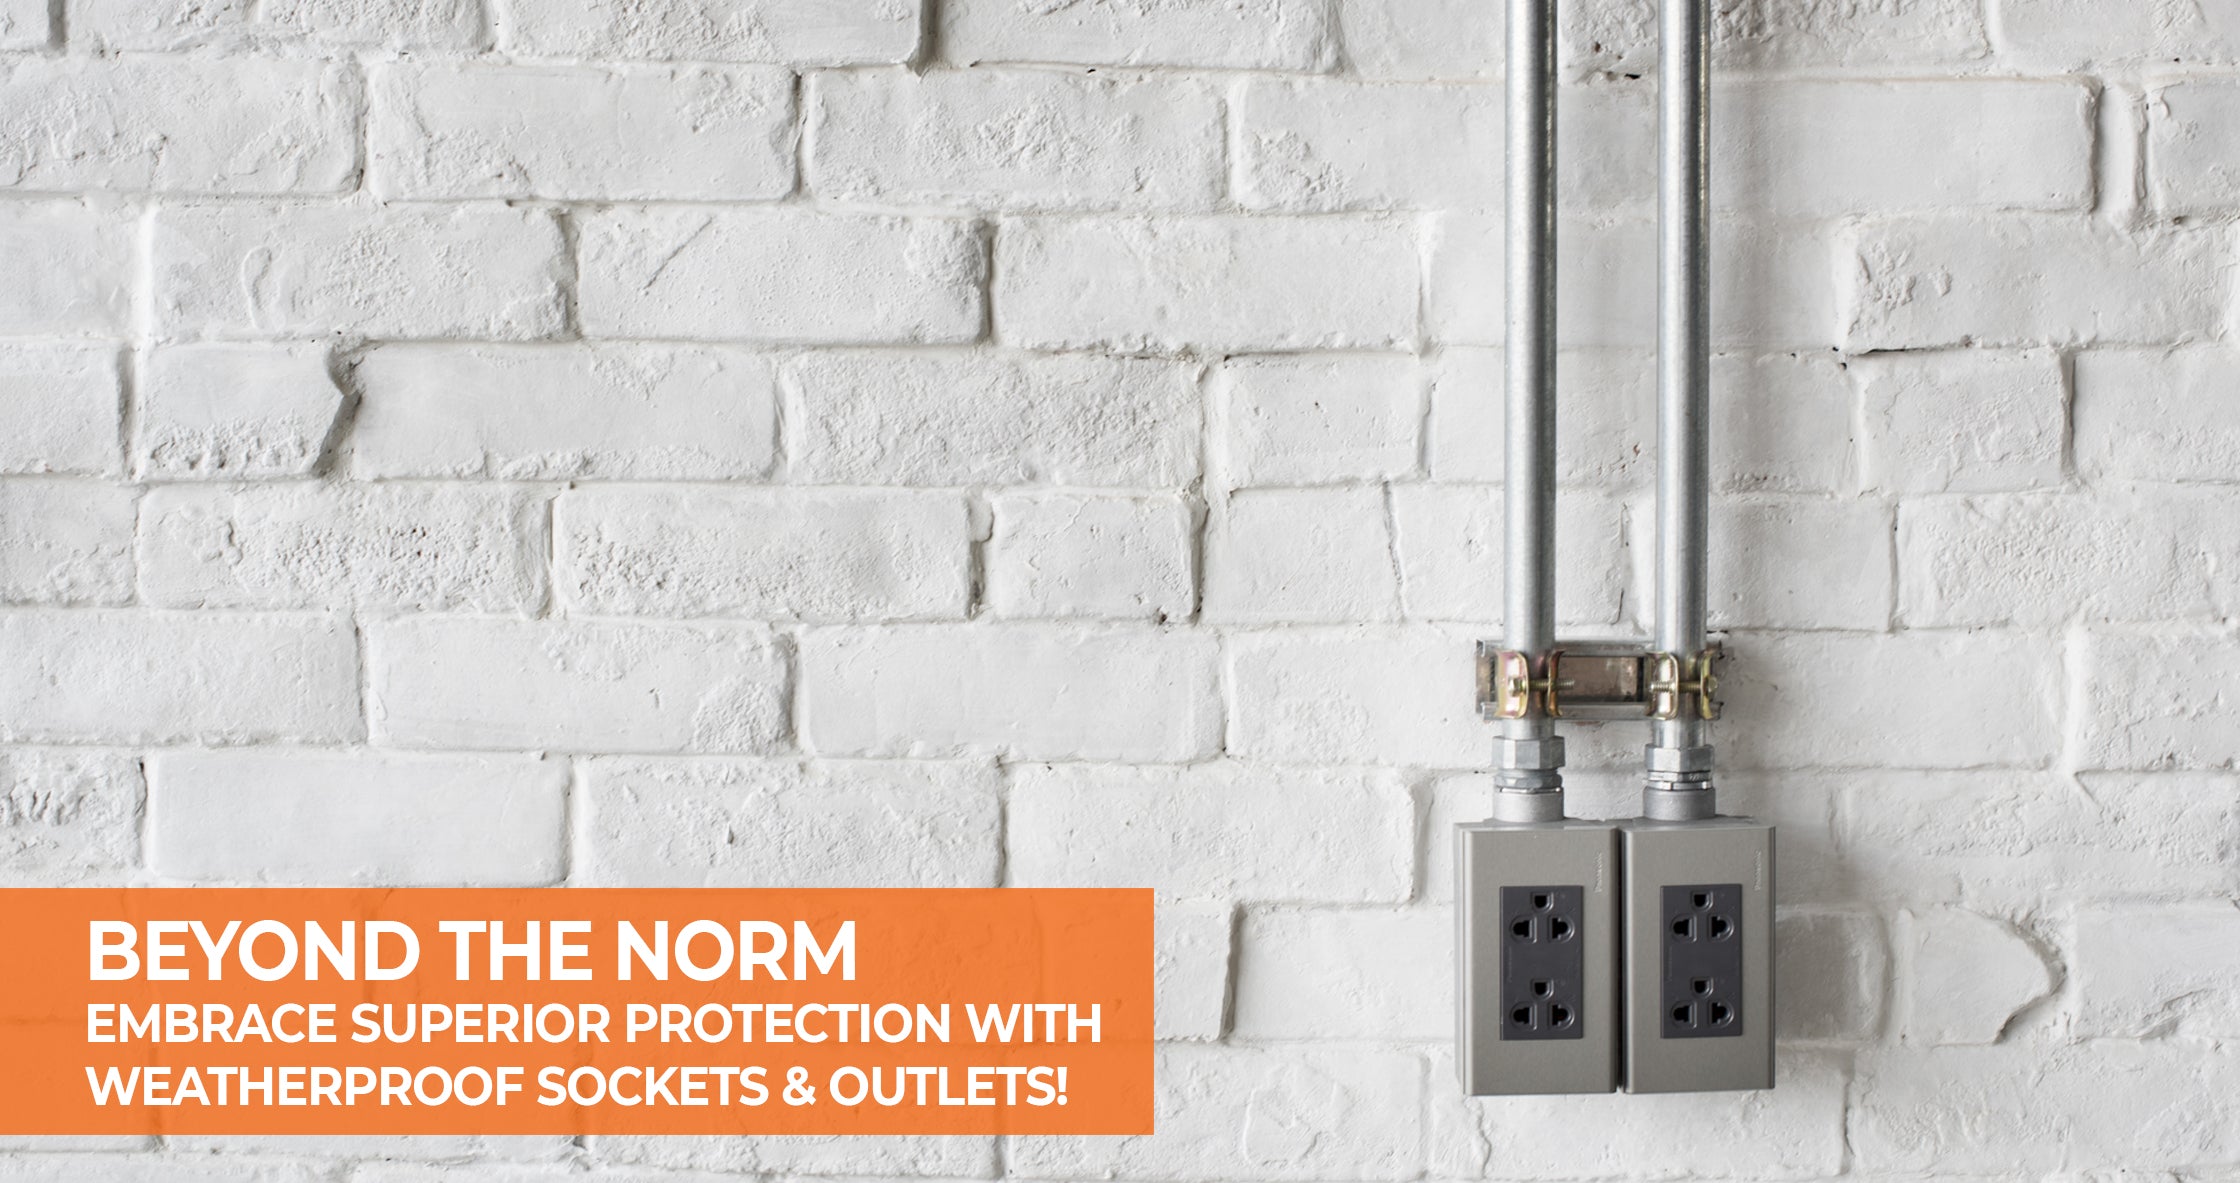 Double weatherproof electrical sockets in a gray casing attached to metal conduit pipes on a white brick wall, with text overlay 'Beyond the Norm: Embrace Superior Protection with Weatherproof Sockets & Outlets!